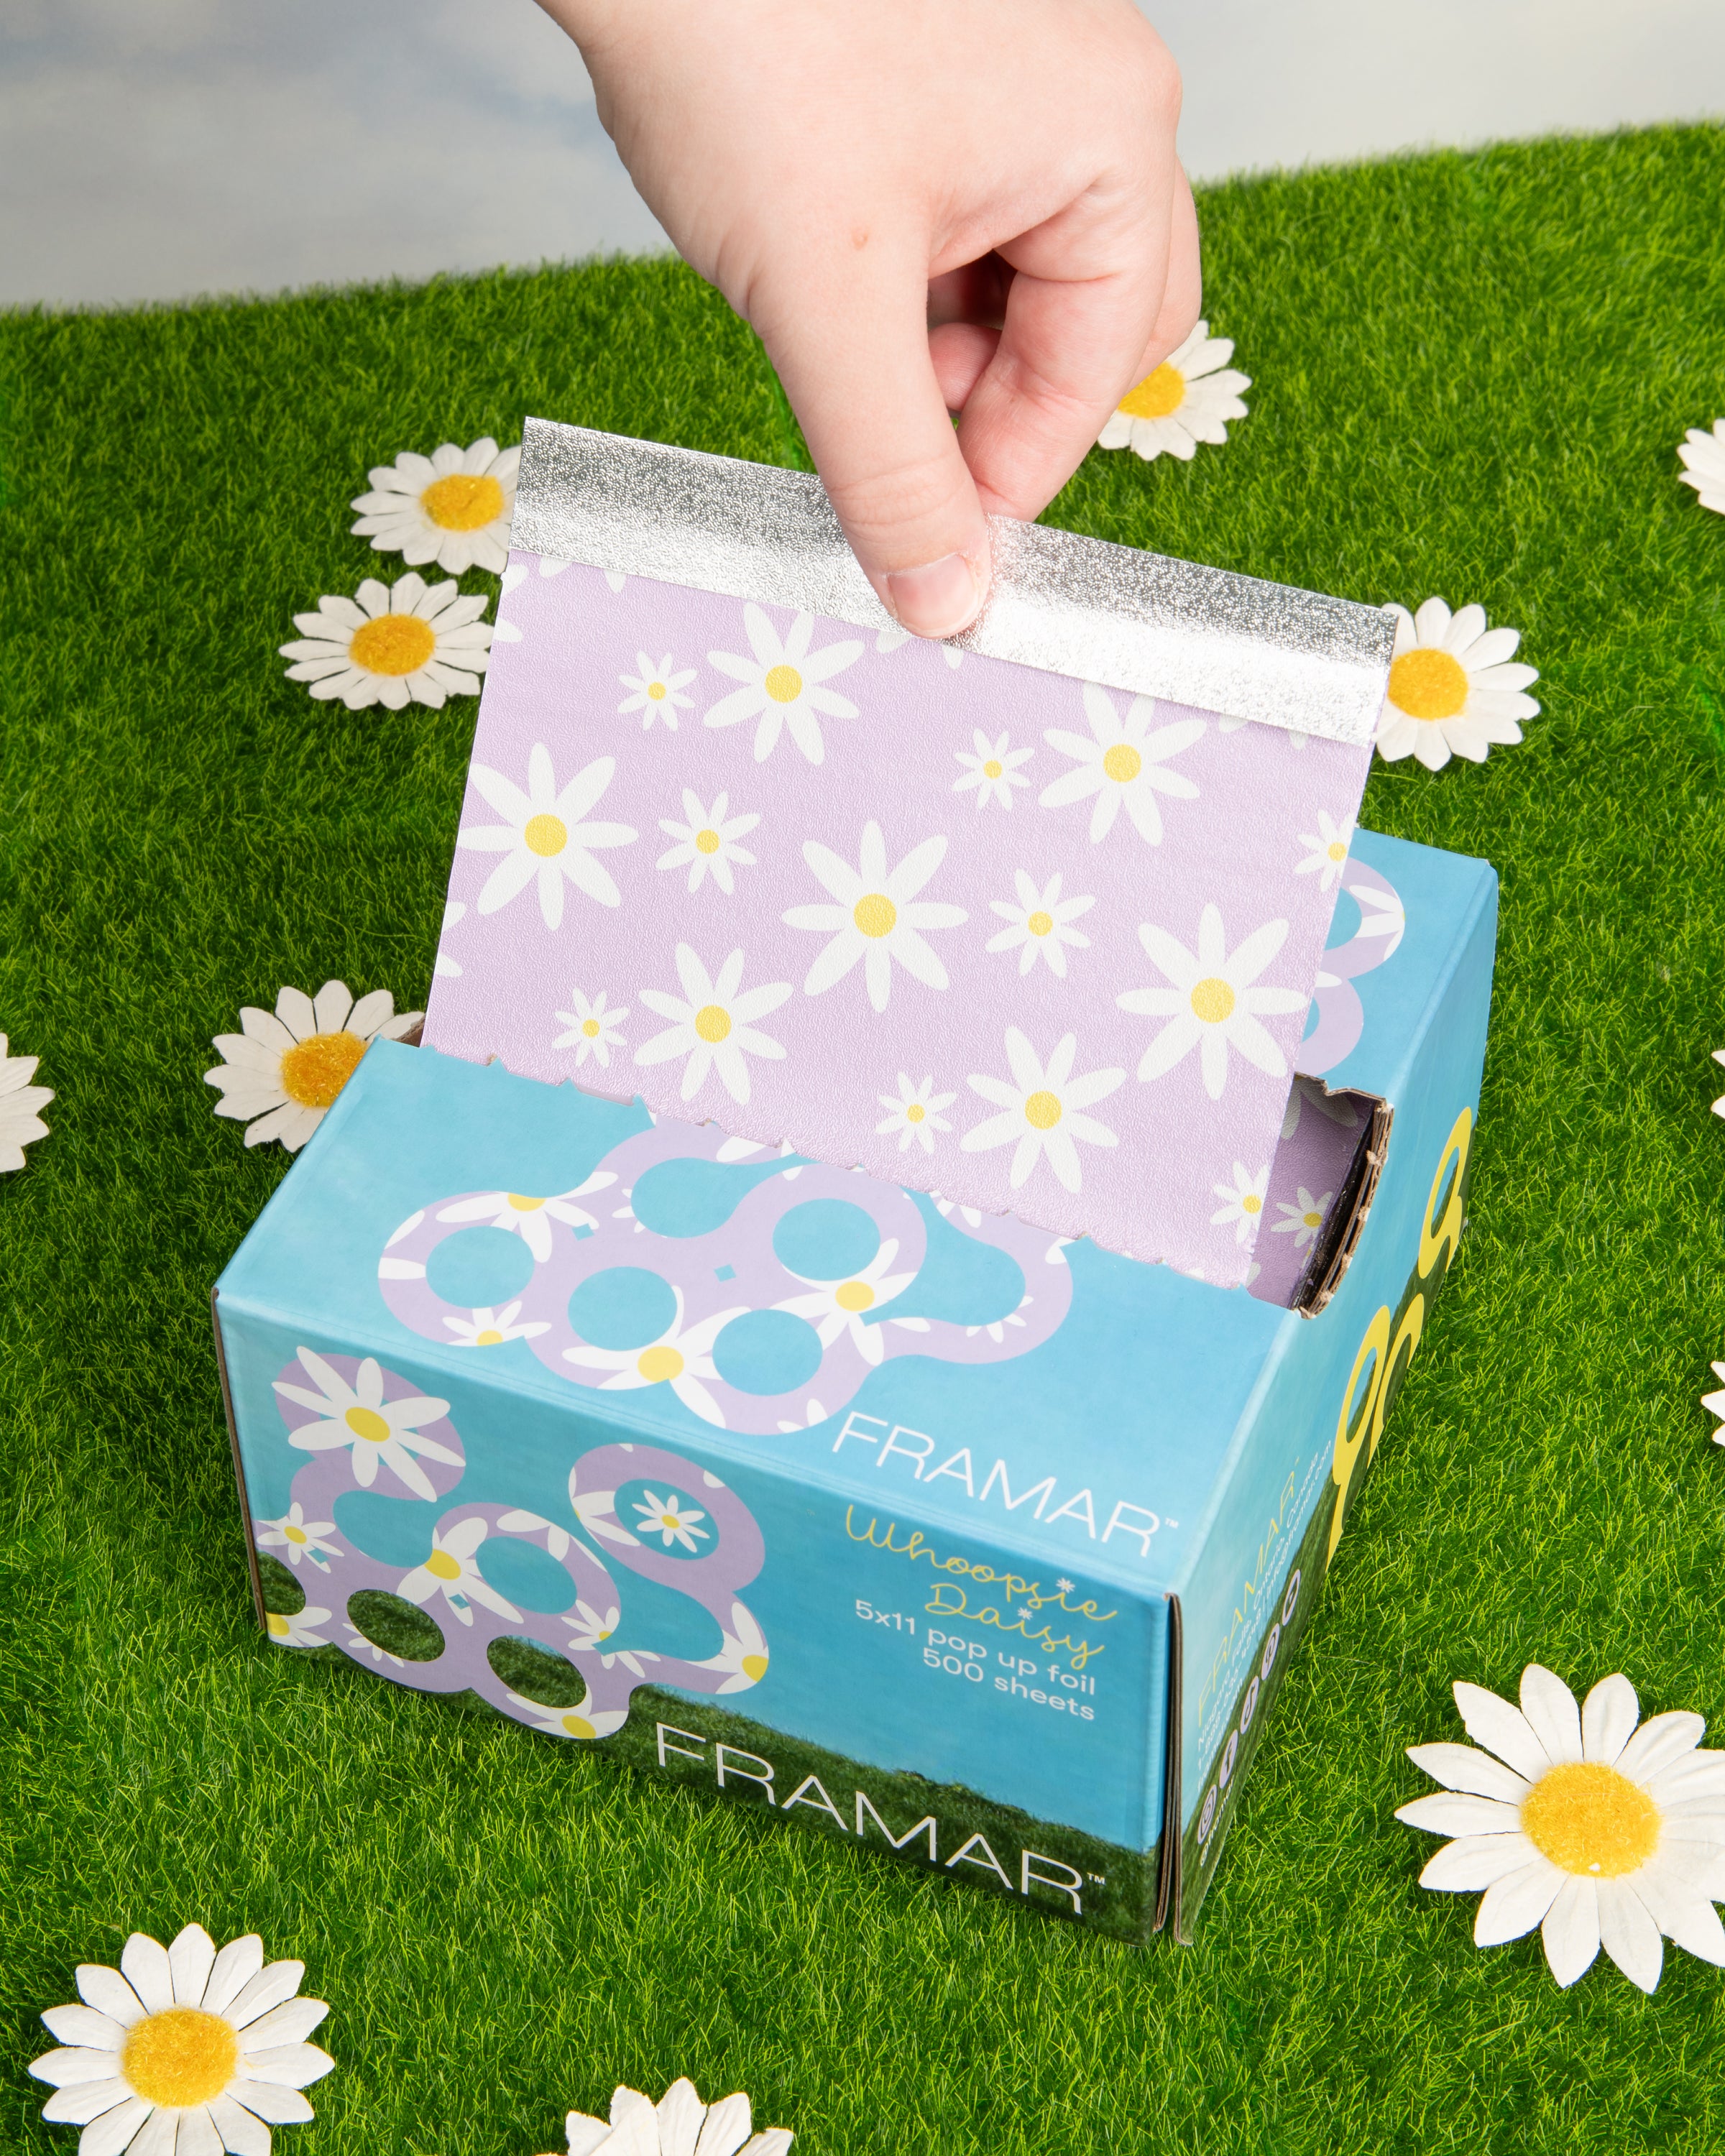 A hand pulling daisy-printed foil from a colorful Framar box on artificial grass with daisy decorations.